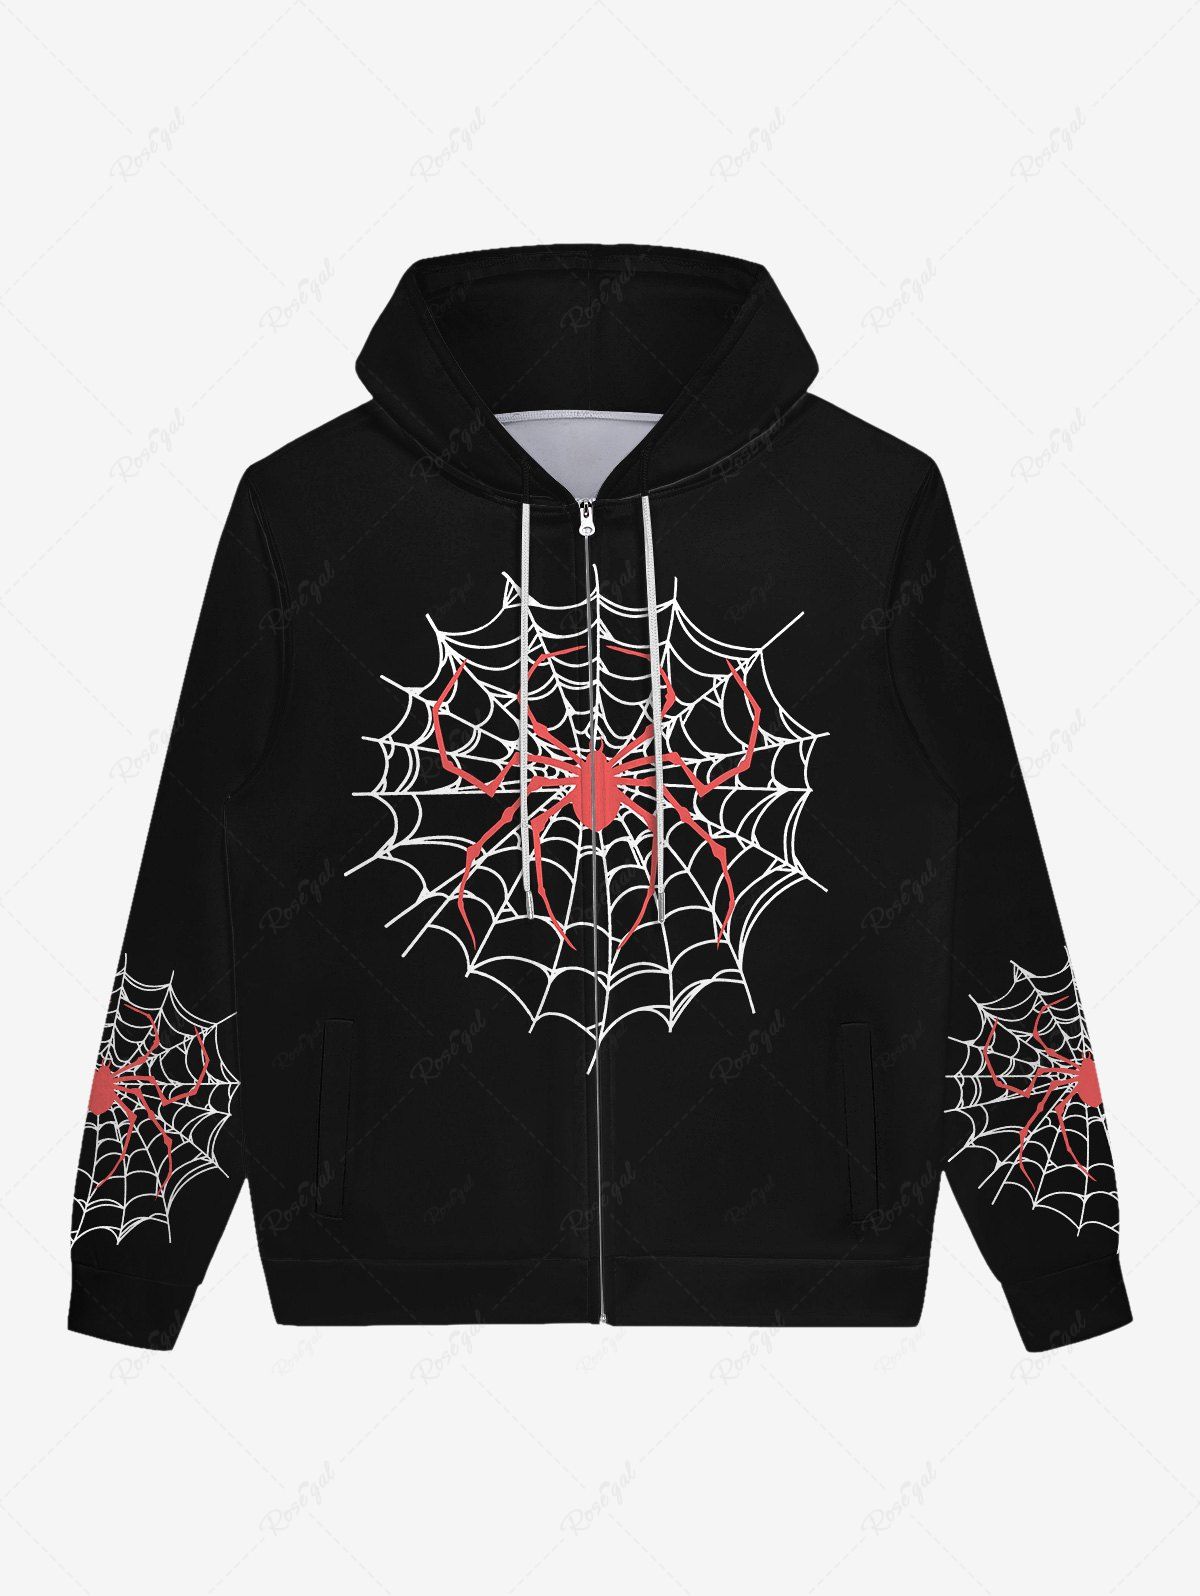 New Gothic Spider and Spider-Web Print Halloween Zipper Drawstring Hoodie For Men  